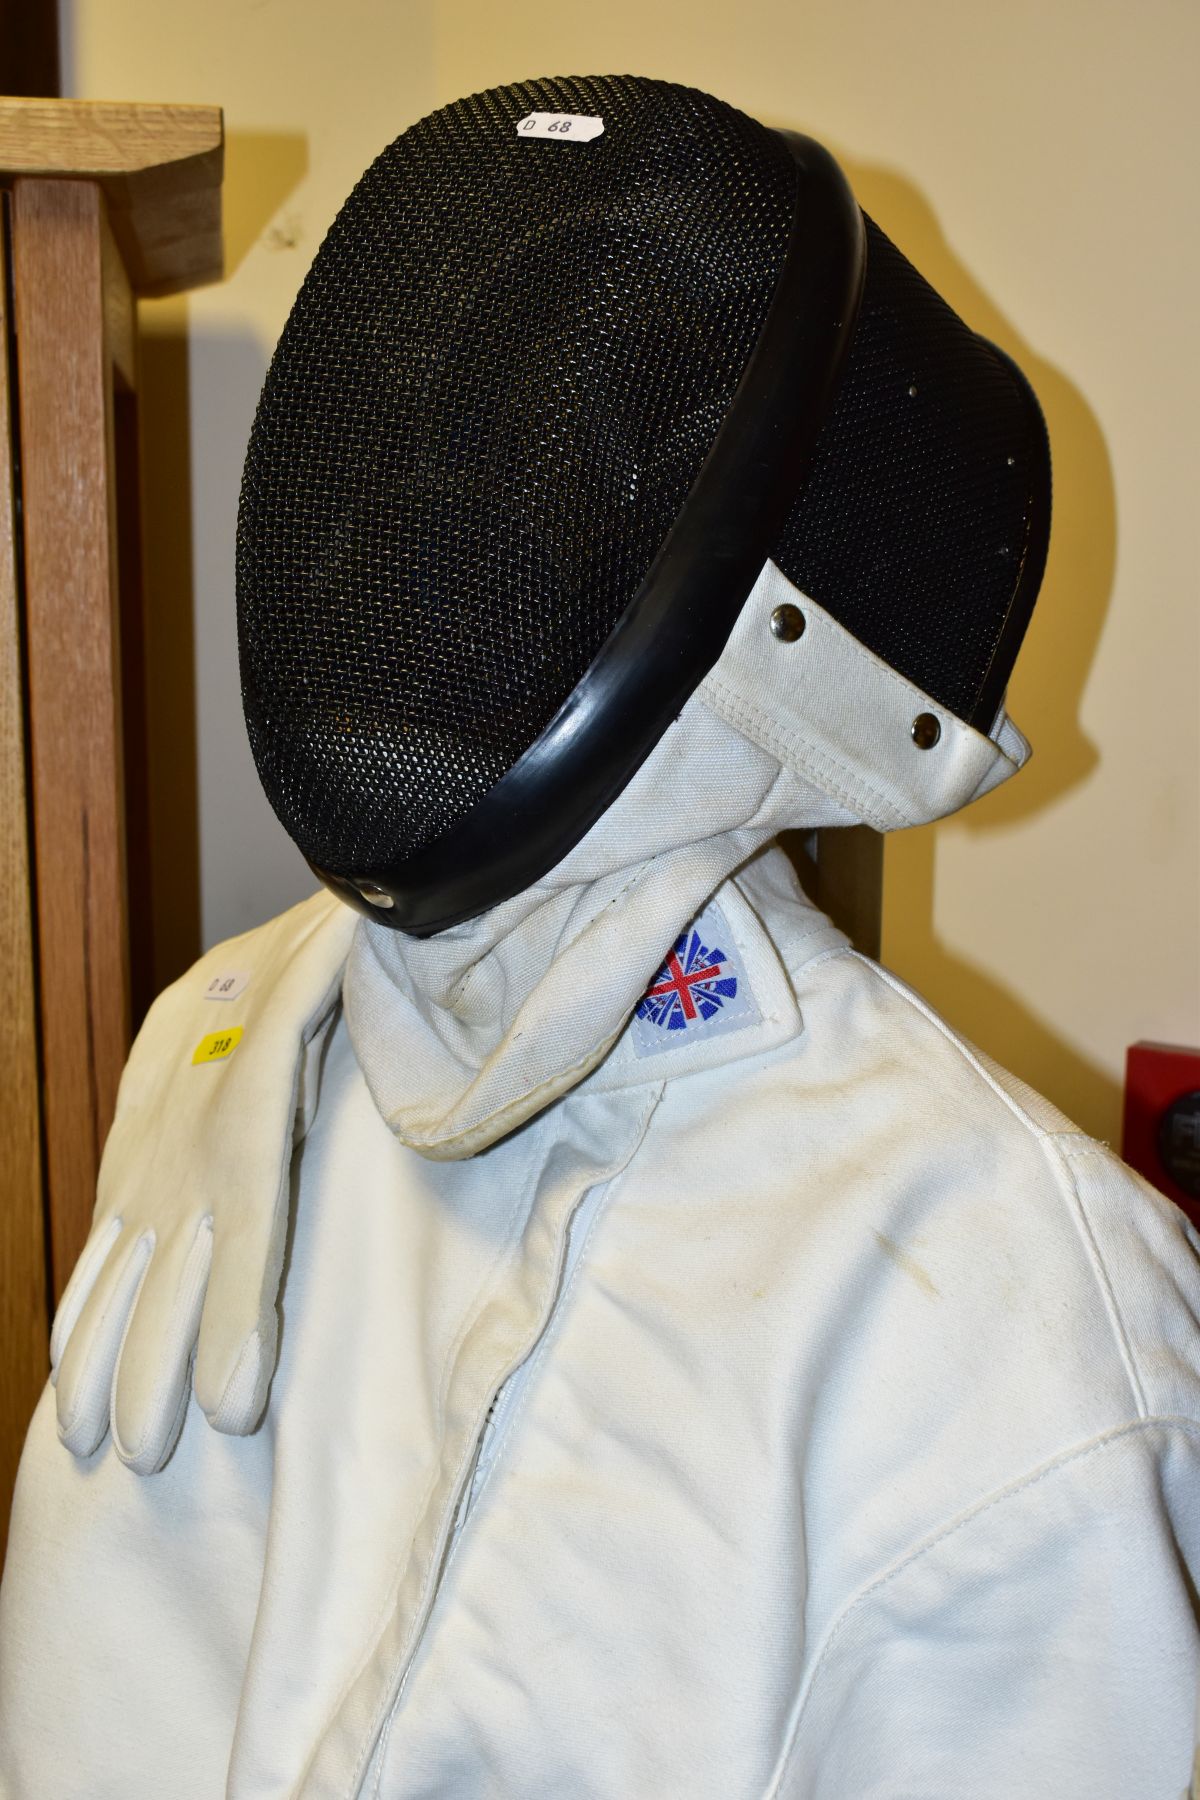 LEON PAUL FENCING MASK, JACKET, FOIL AND BAG, together with a glove (unmarked) - Image 2 of 8